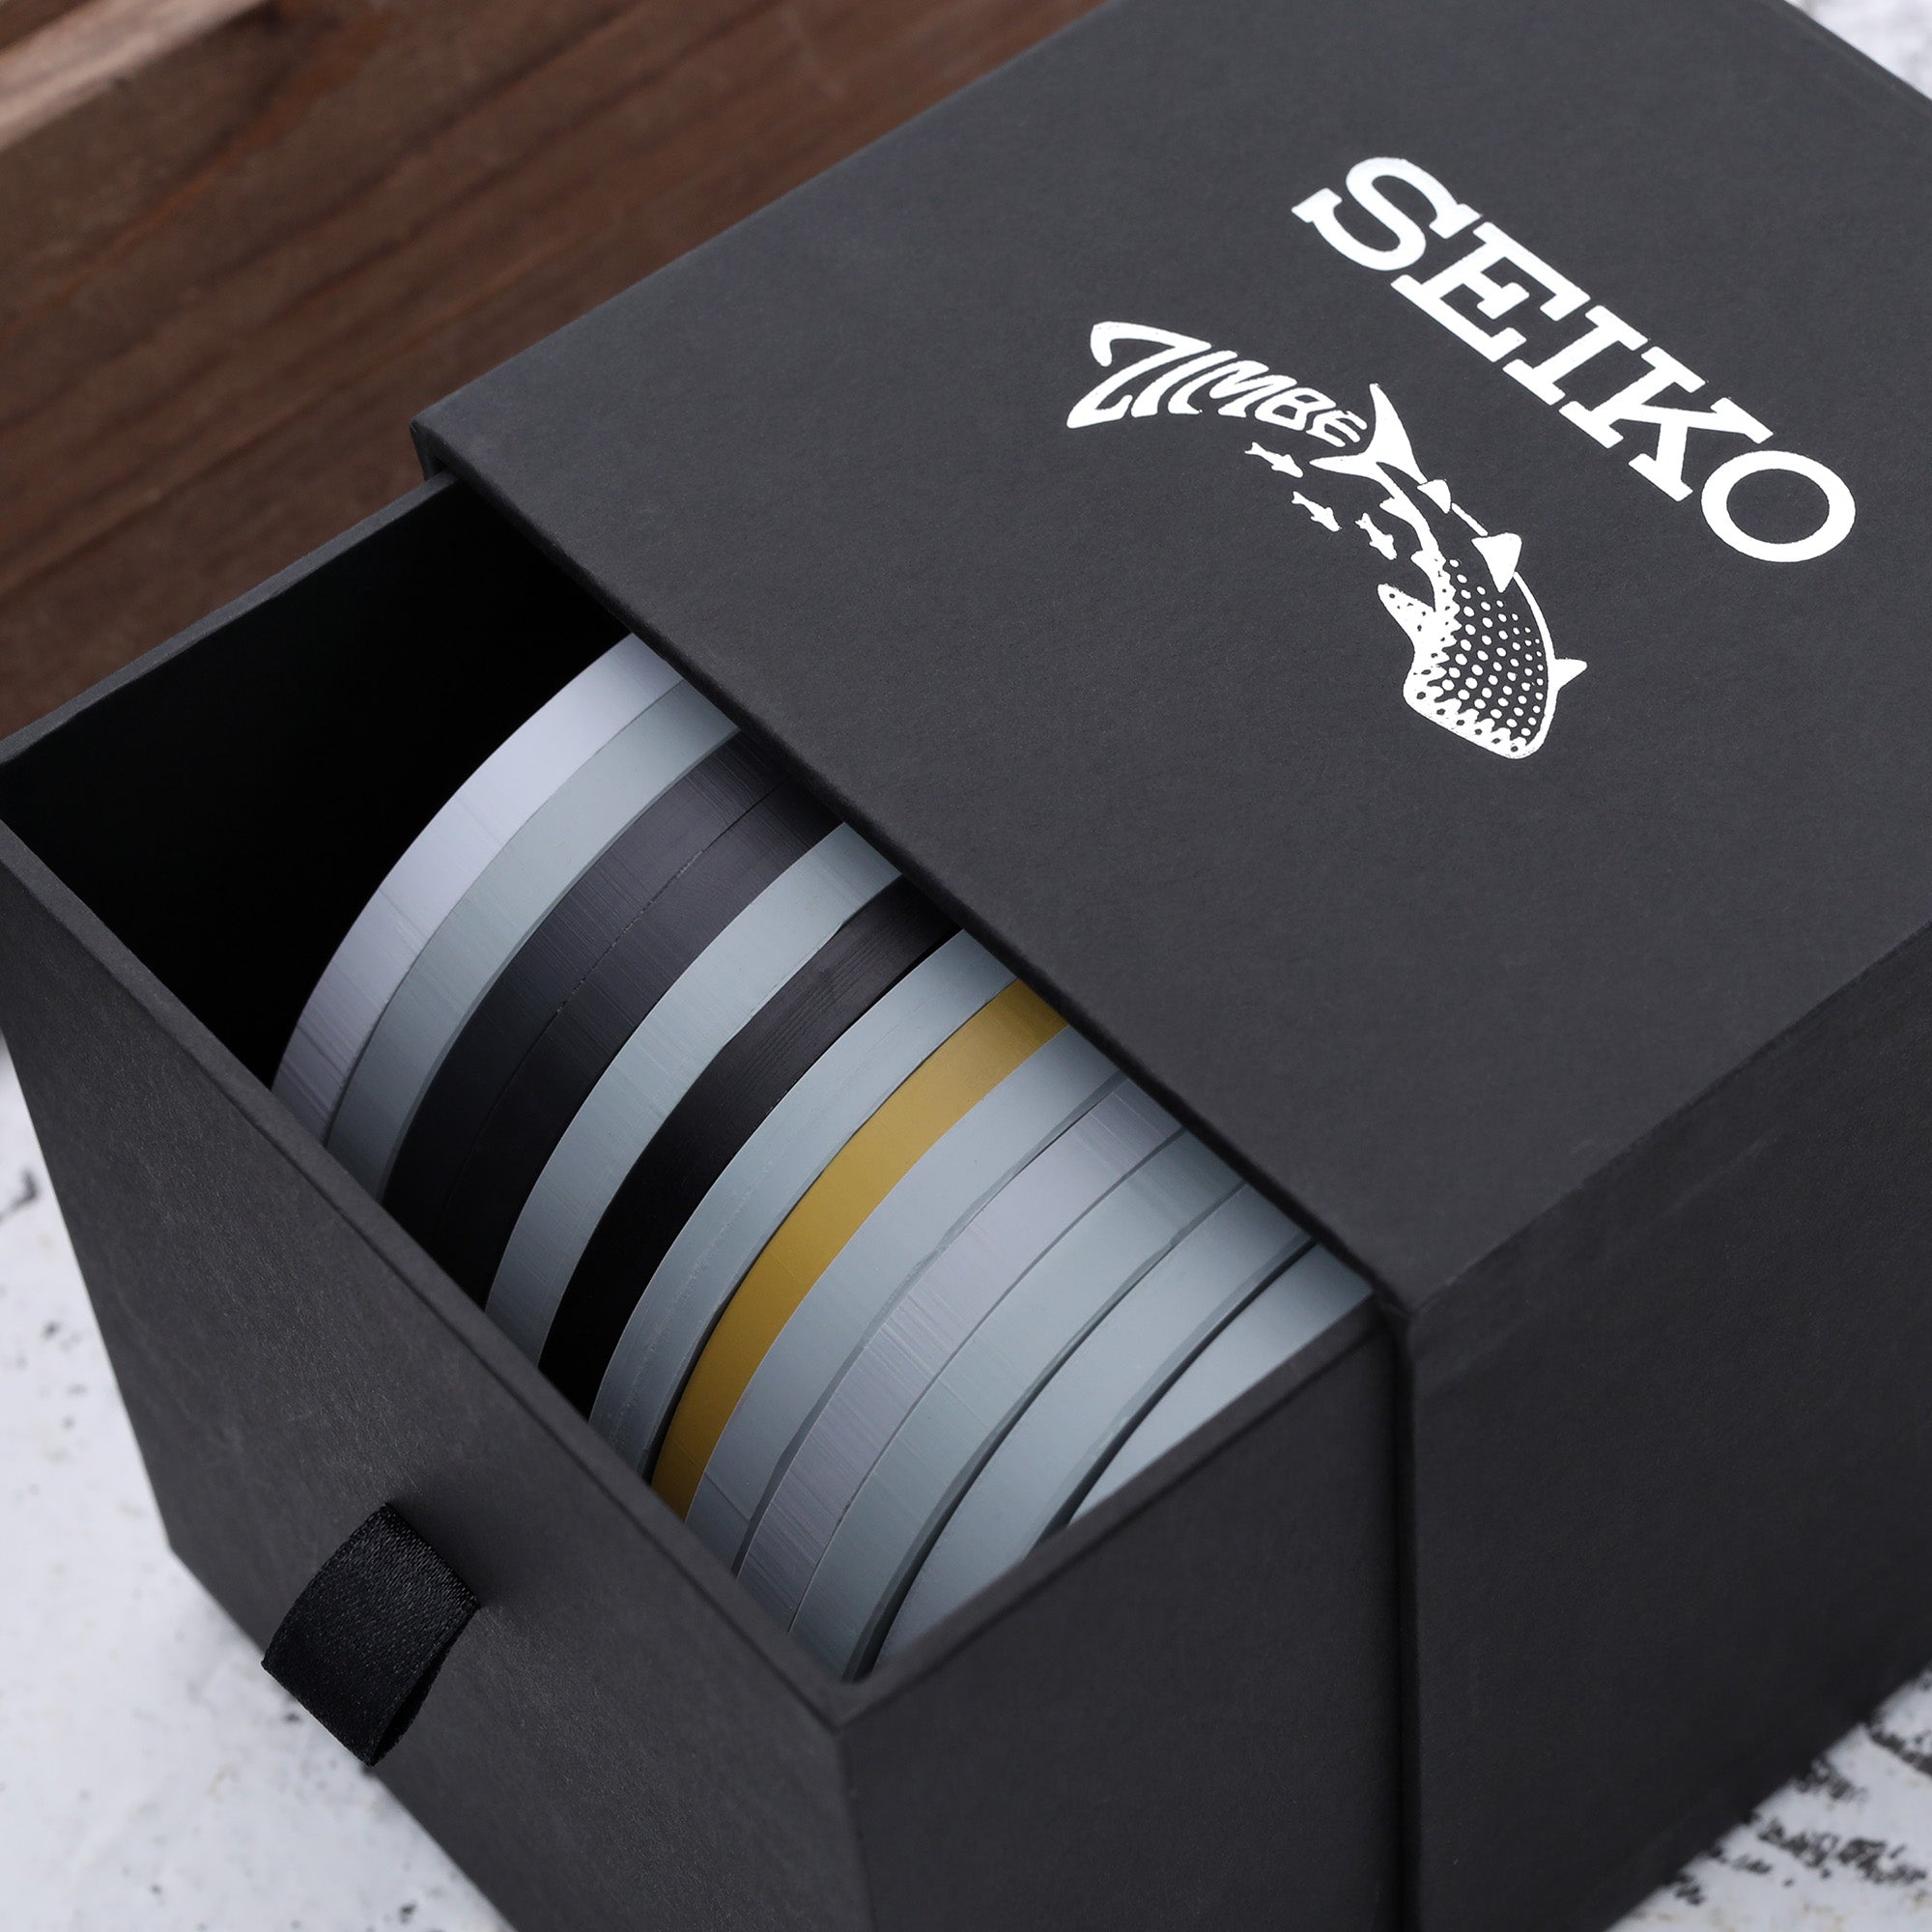 Pre-orders of Seiko Zimbe 12 also included a nice set of 13 coasters